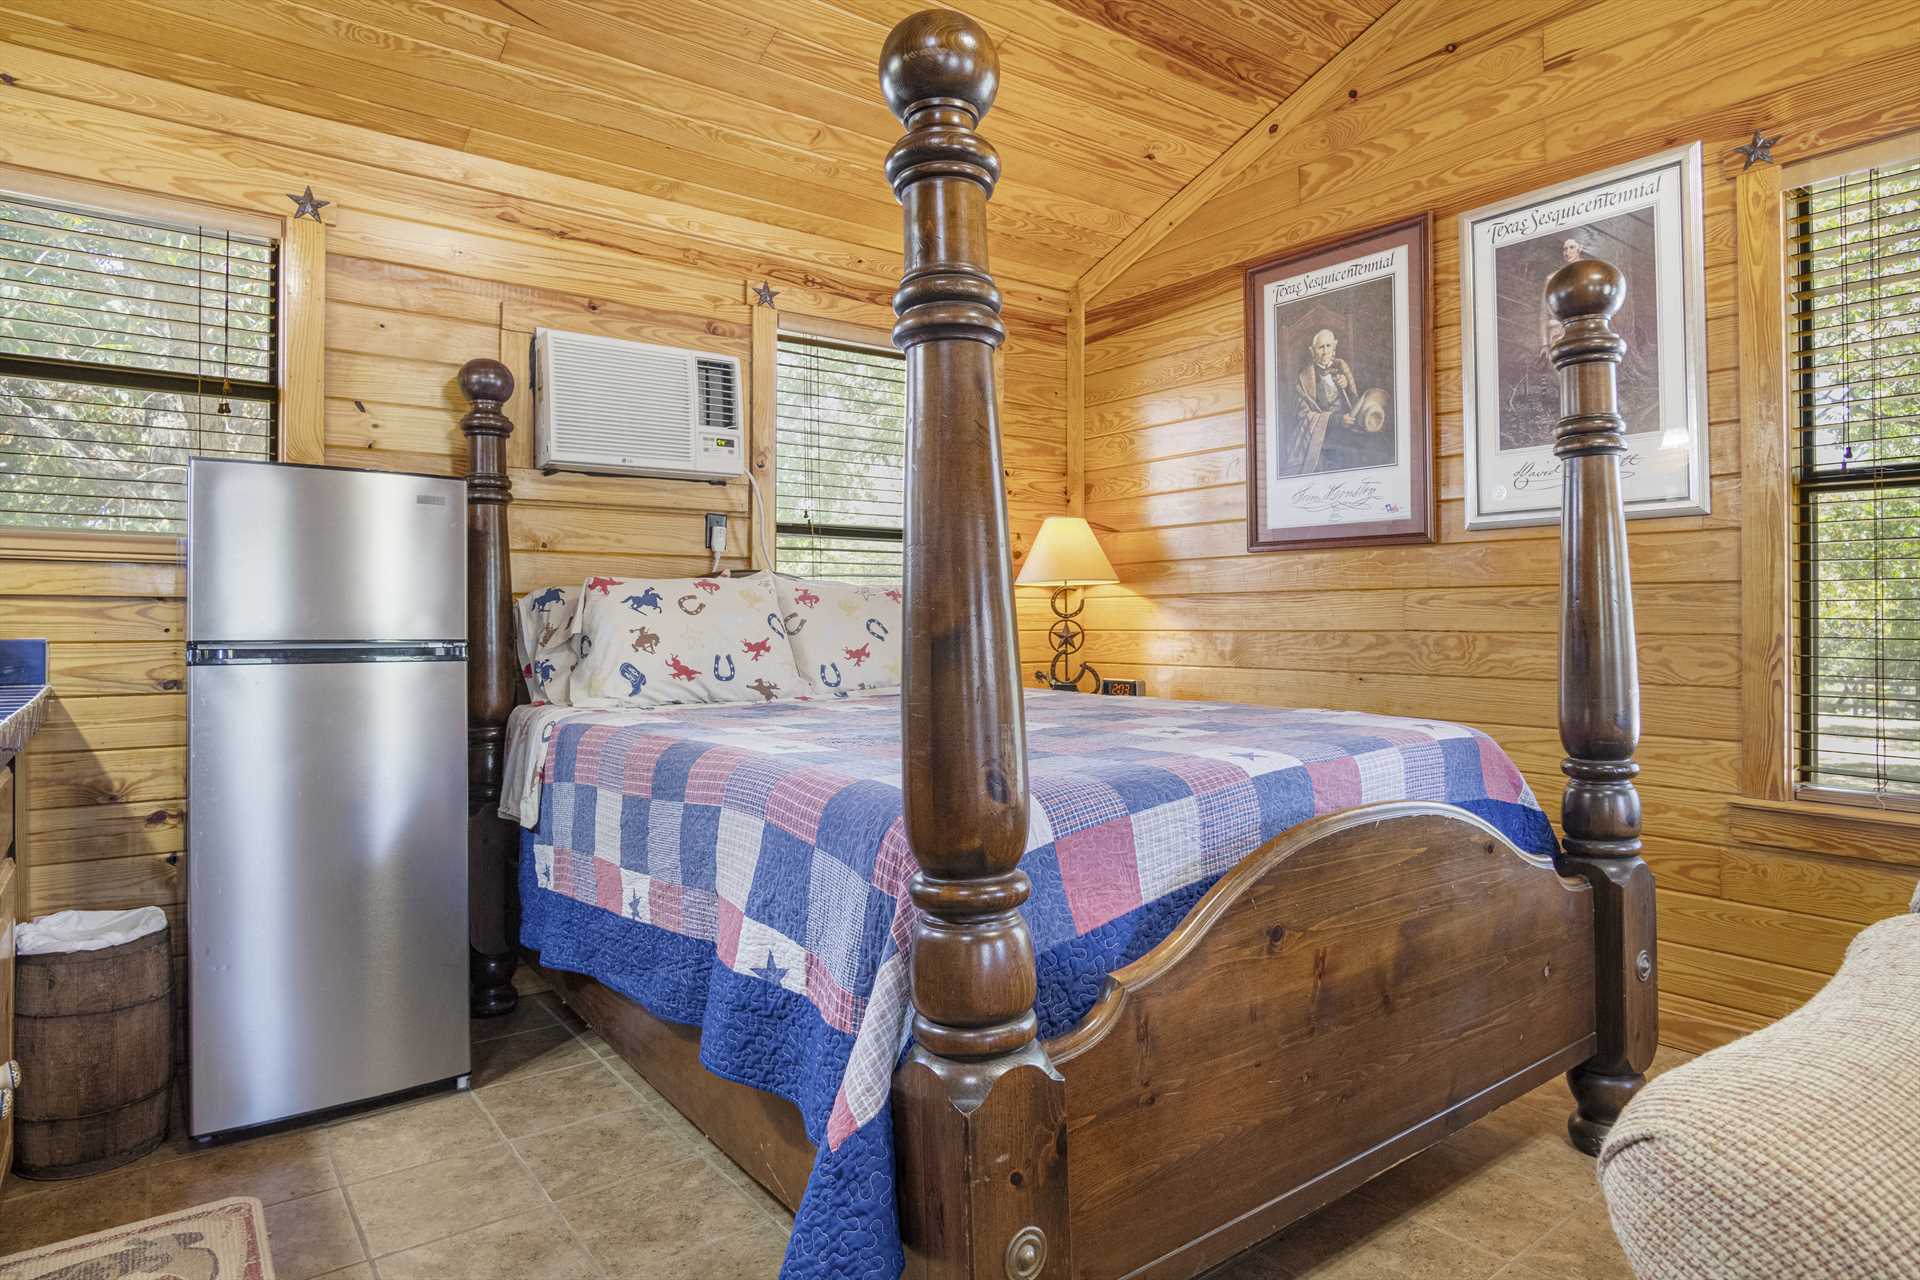                                                 Check out the vintage four-poster frame on the great big queen-sized bed! Overall, the Texan Cabin sleeps up to four people.